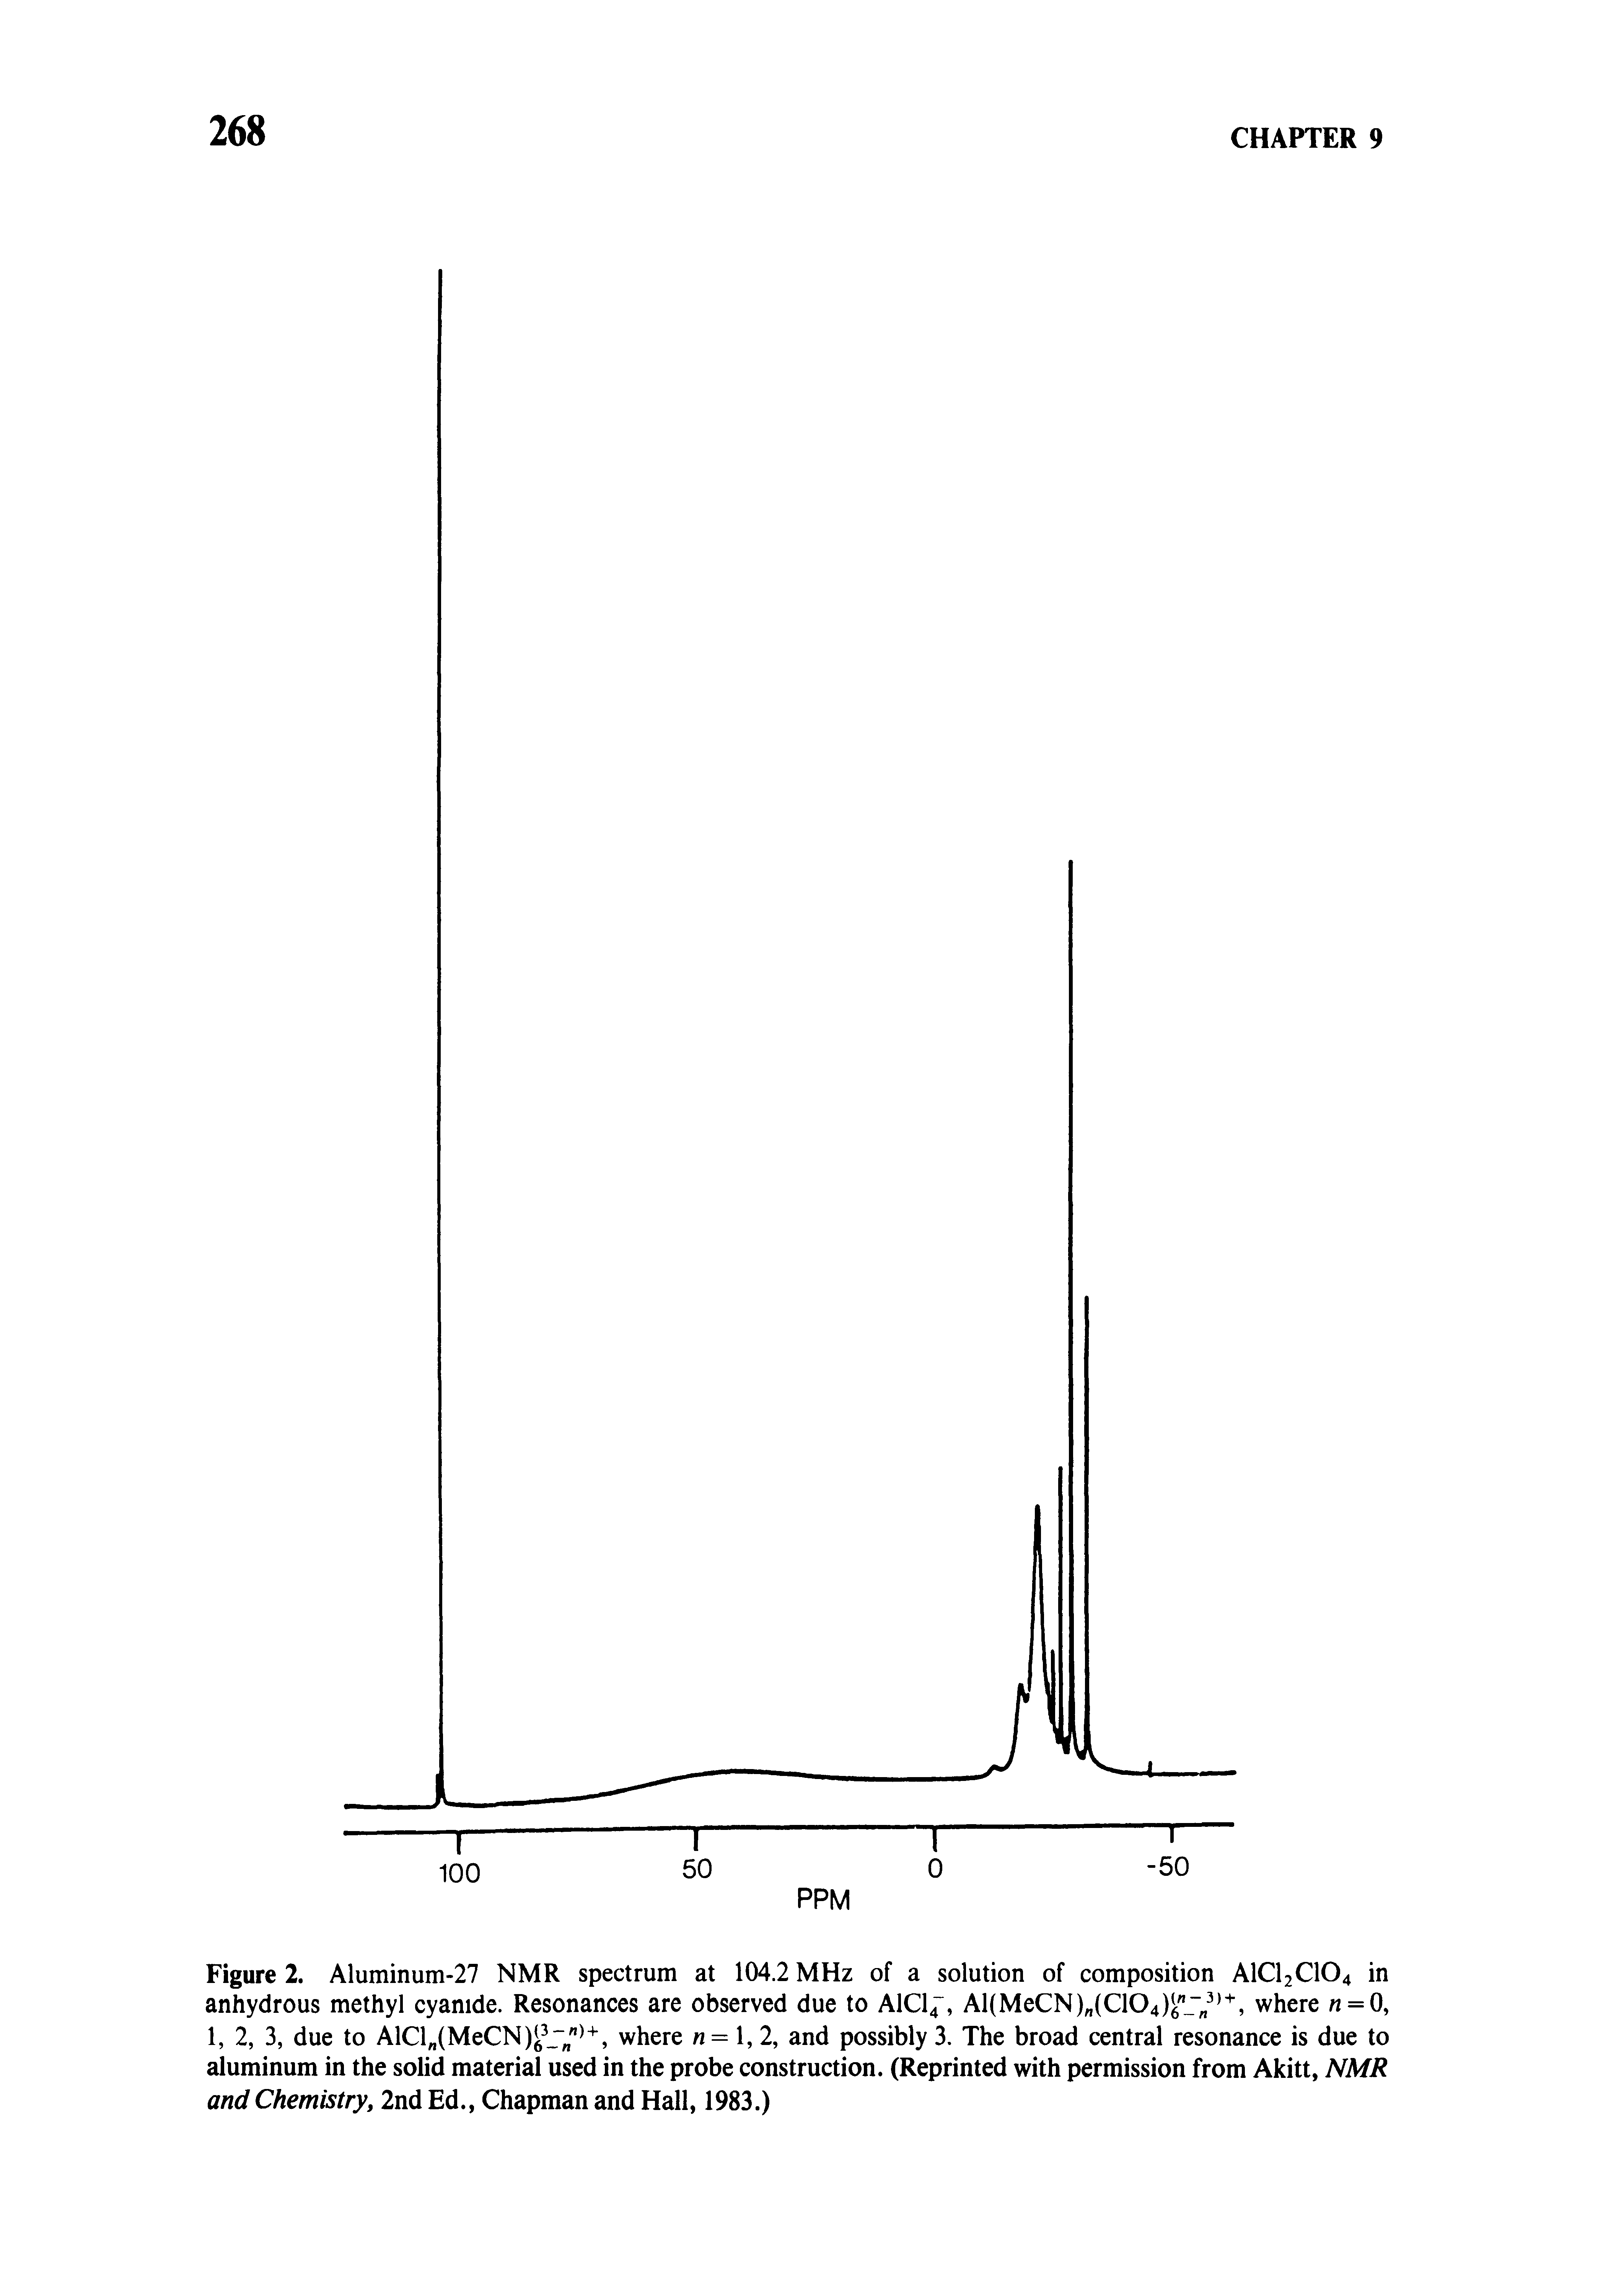 Figure 2. Aluminum-27 NMR spectrum at 104.2 MHz of a solution of composition AICI2CIO4 in anhydrous methyl cyanide. Resonances are observed due to AlCl4, Al(MeCN) (C104) "j , where = 0, 1, 2, 3, due to AlCl (MeCN) " ", where n =, 2, and possibly 3. The broad central resonance is due to aluminum in the solid material used in the probe construction. (Reprinted with permission from Akitt, NMR and Chemistry, 2nd Ed., Chapman and Hall, 1983.)...